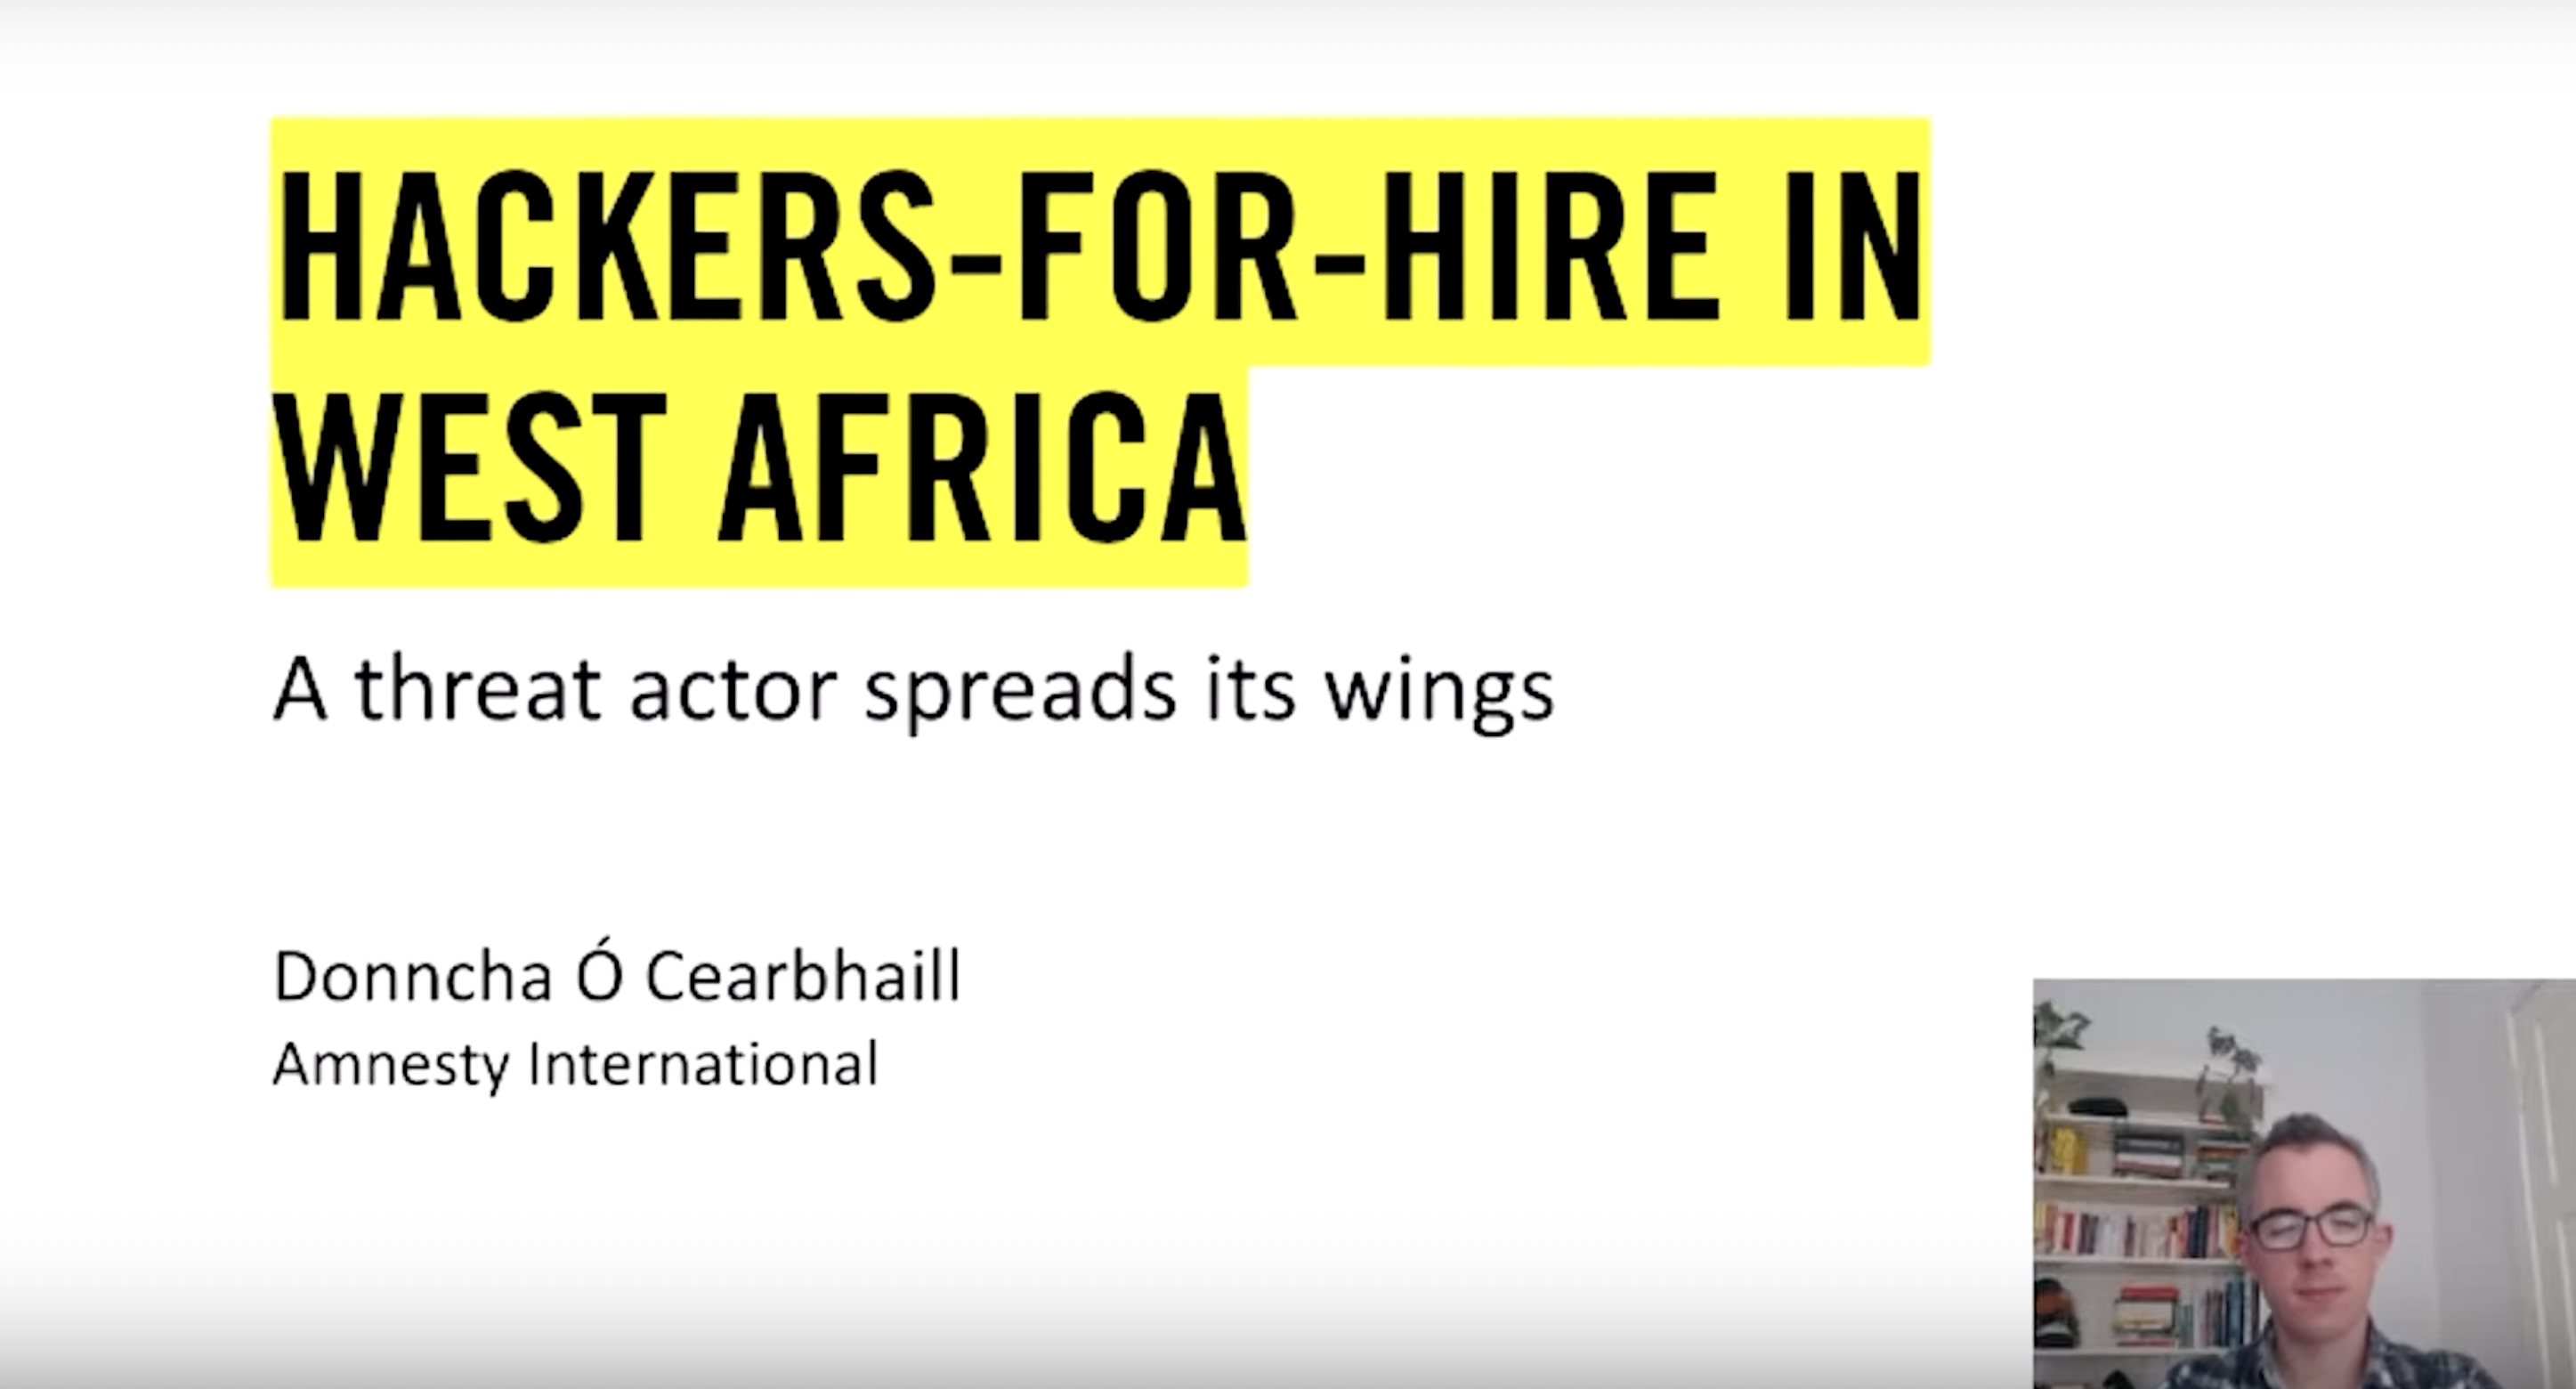 Hackers-for-hire in West Africa: a threat actor spreads its wings